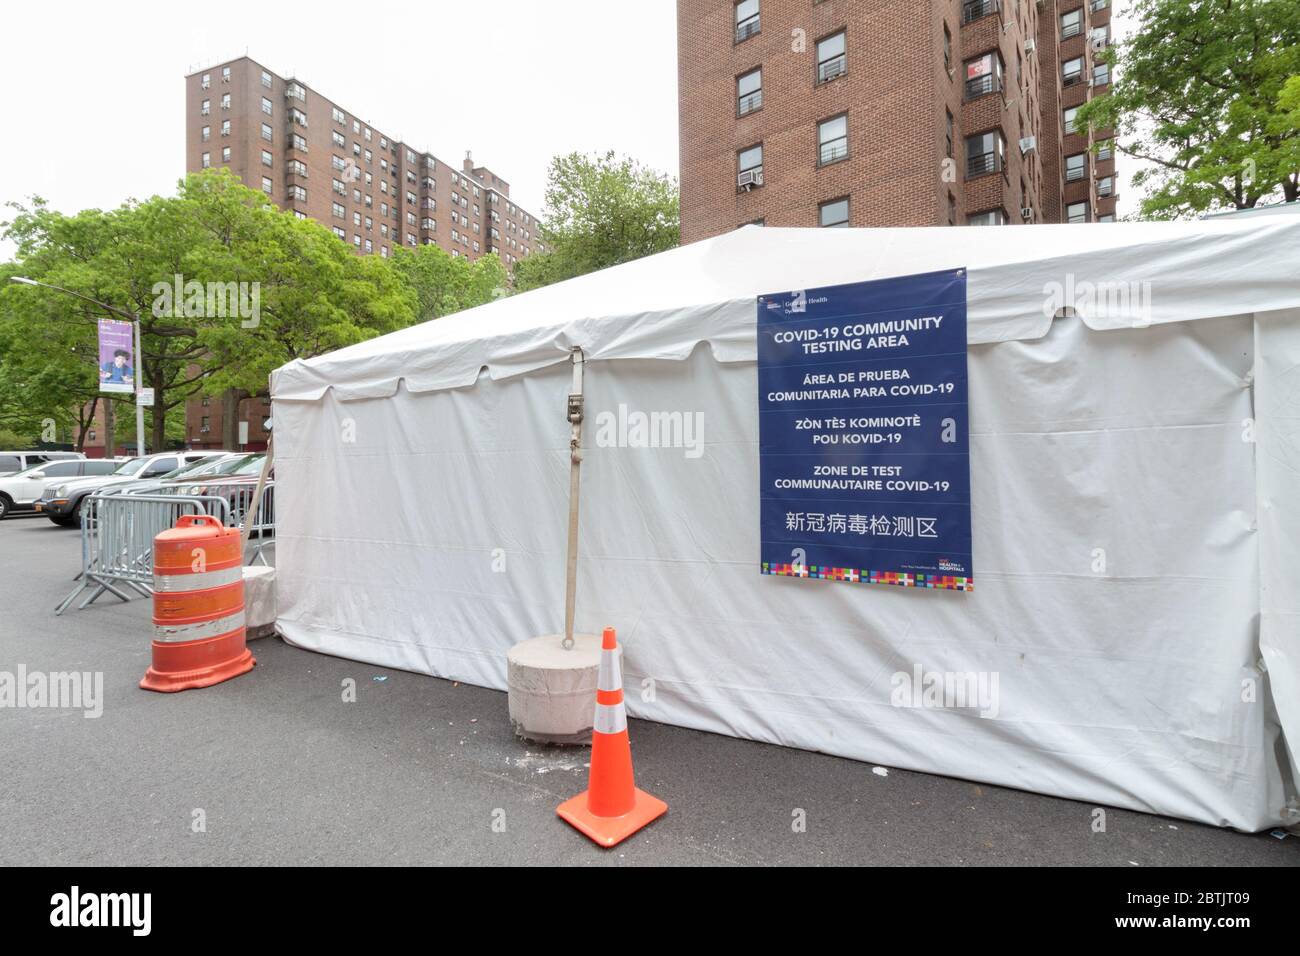 the Covid-19 Community Testing Area tent in front of the Dyckman Houses project in Inwood set up to help monitor the coronavirus or covid-19 pandemic Stock Photo